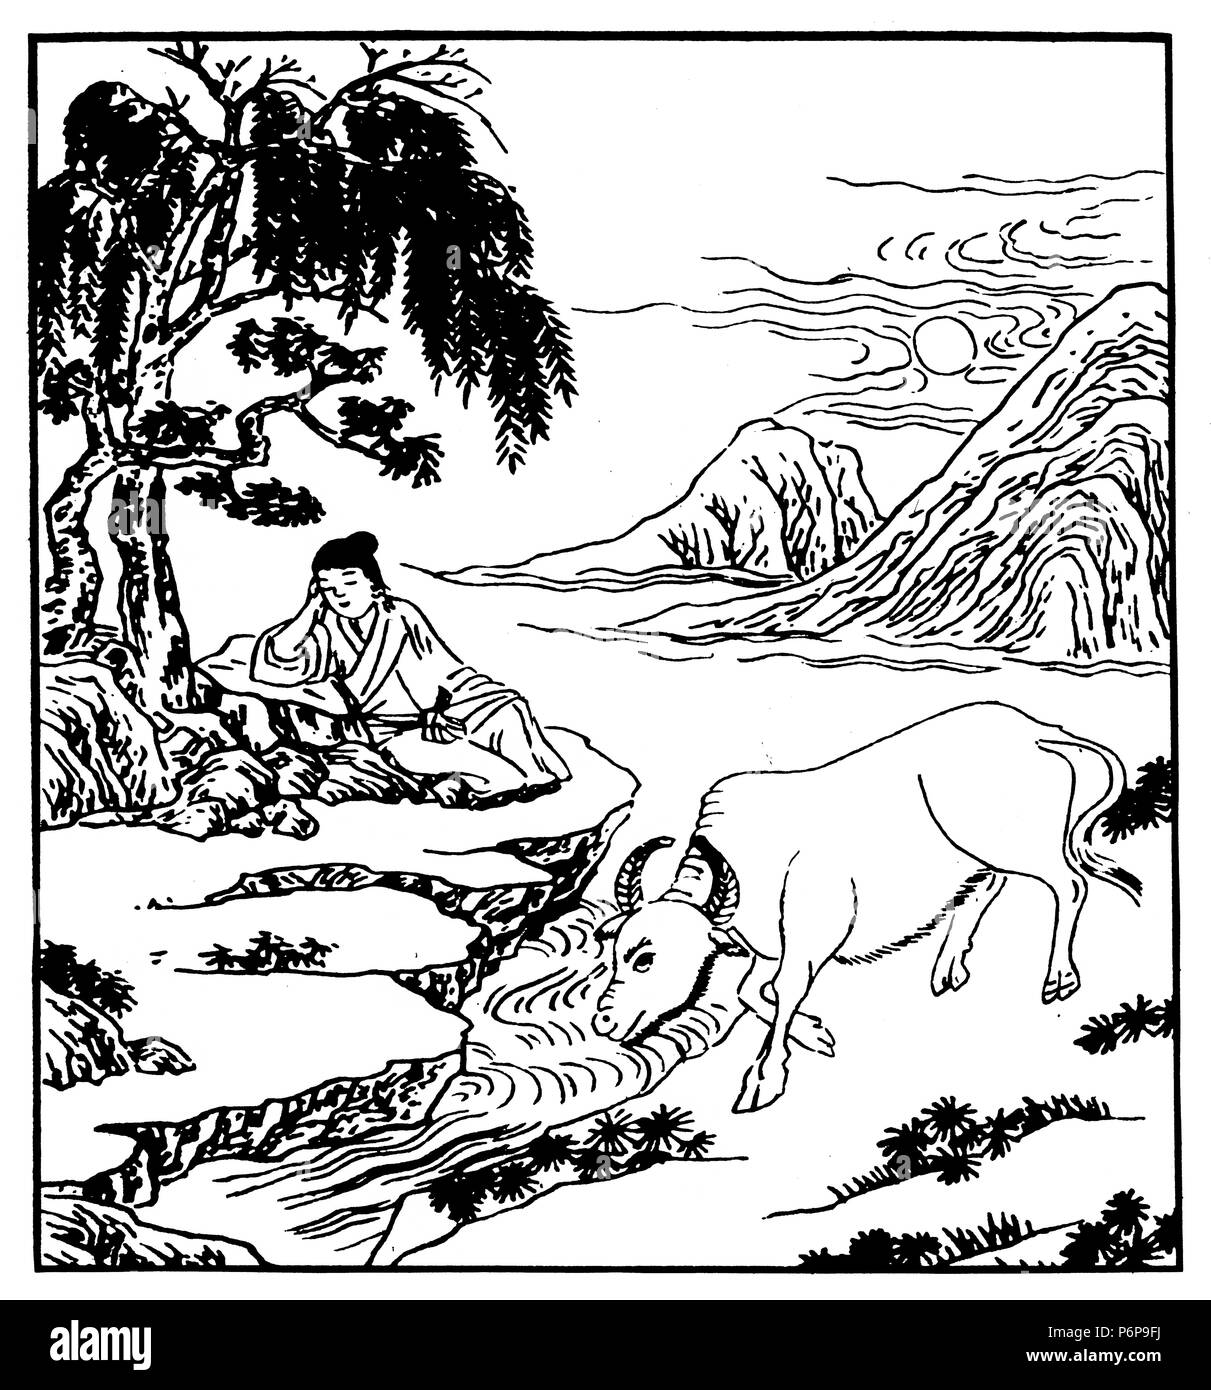 The Ten Oxherding Pictures by Puming (Fumyo), an unknown author. Stage 7 : Laissez faire. The master sleeps while the tamed ox drinks water from a riv Stock Photo